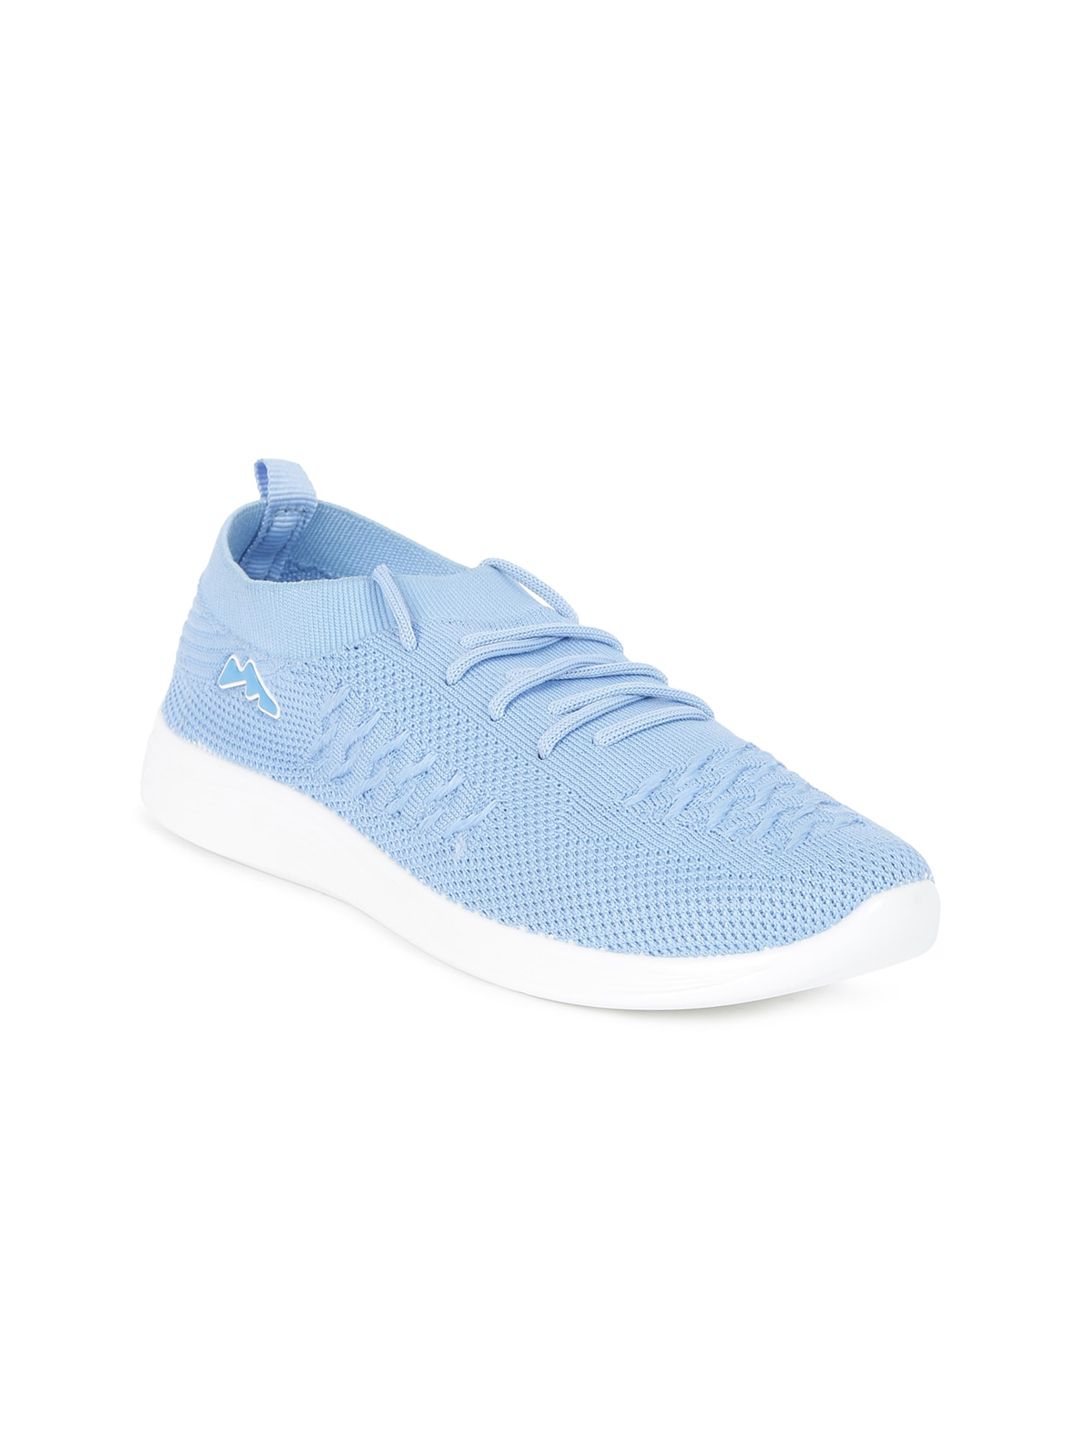 Paragon Women Woven Design Sneakers Price in India